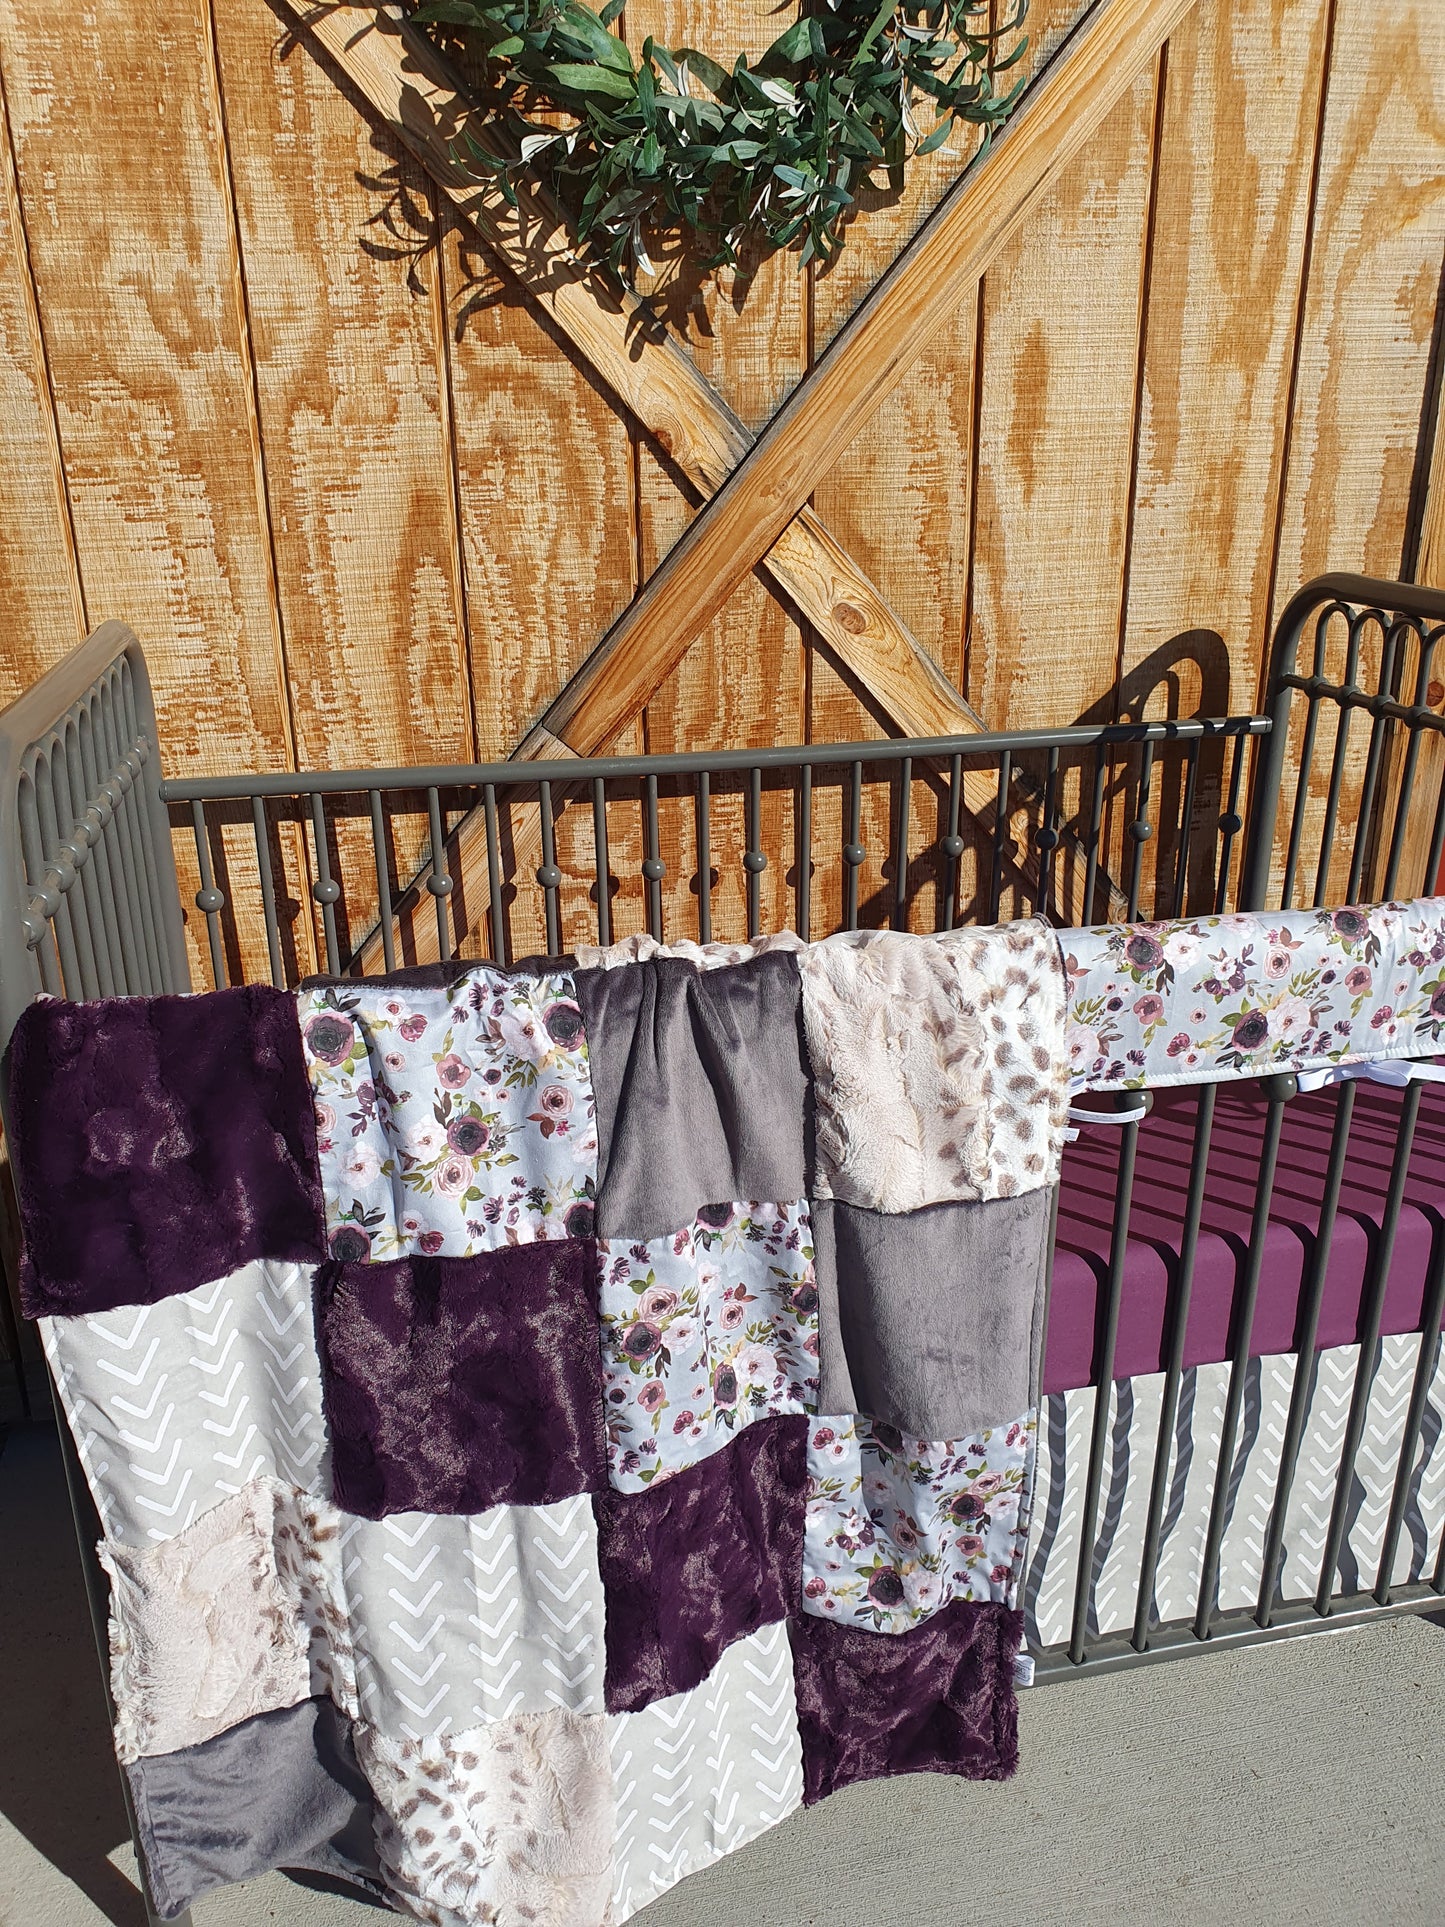 New Release Girl Crib Bedding - Plum Floral and Lynx Minky Boho Baby & Toddler Bedding Collection - DBC Baby Bedding Co 